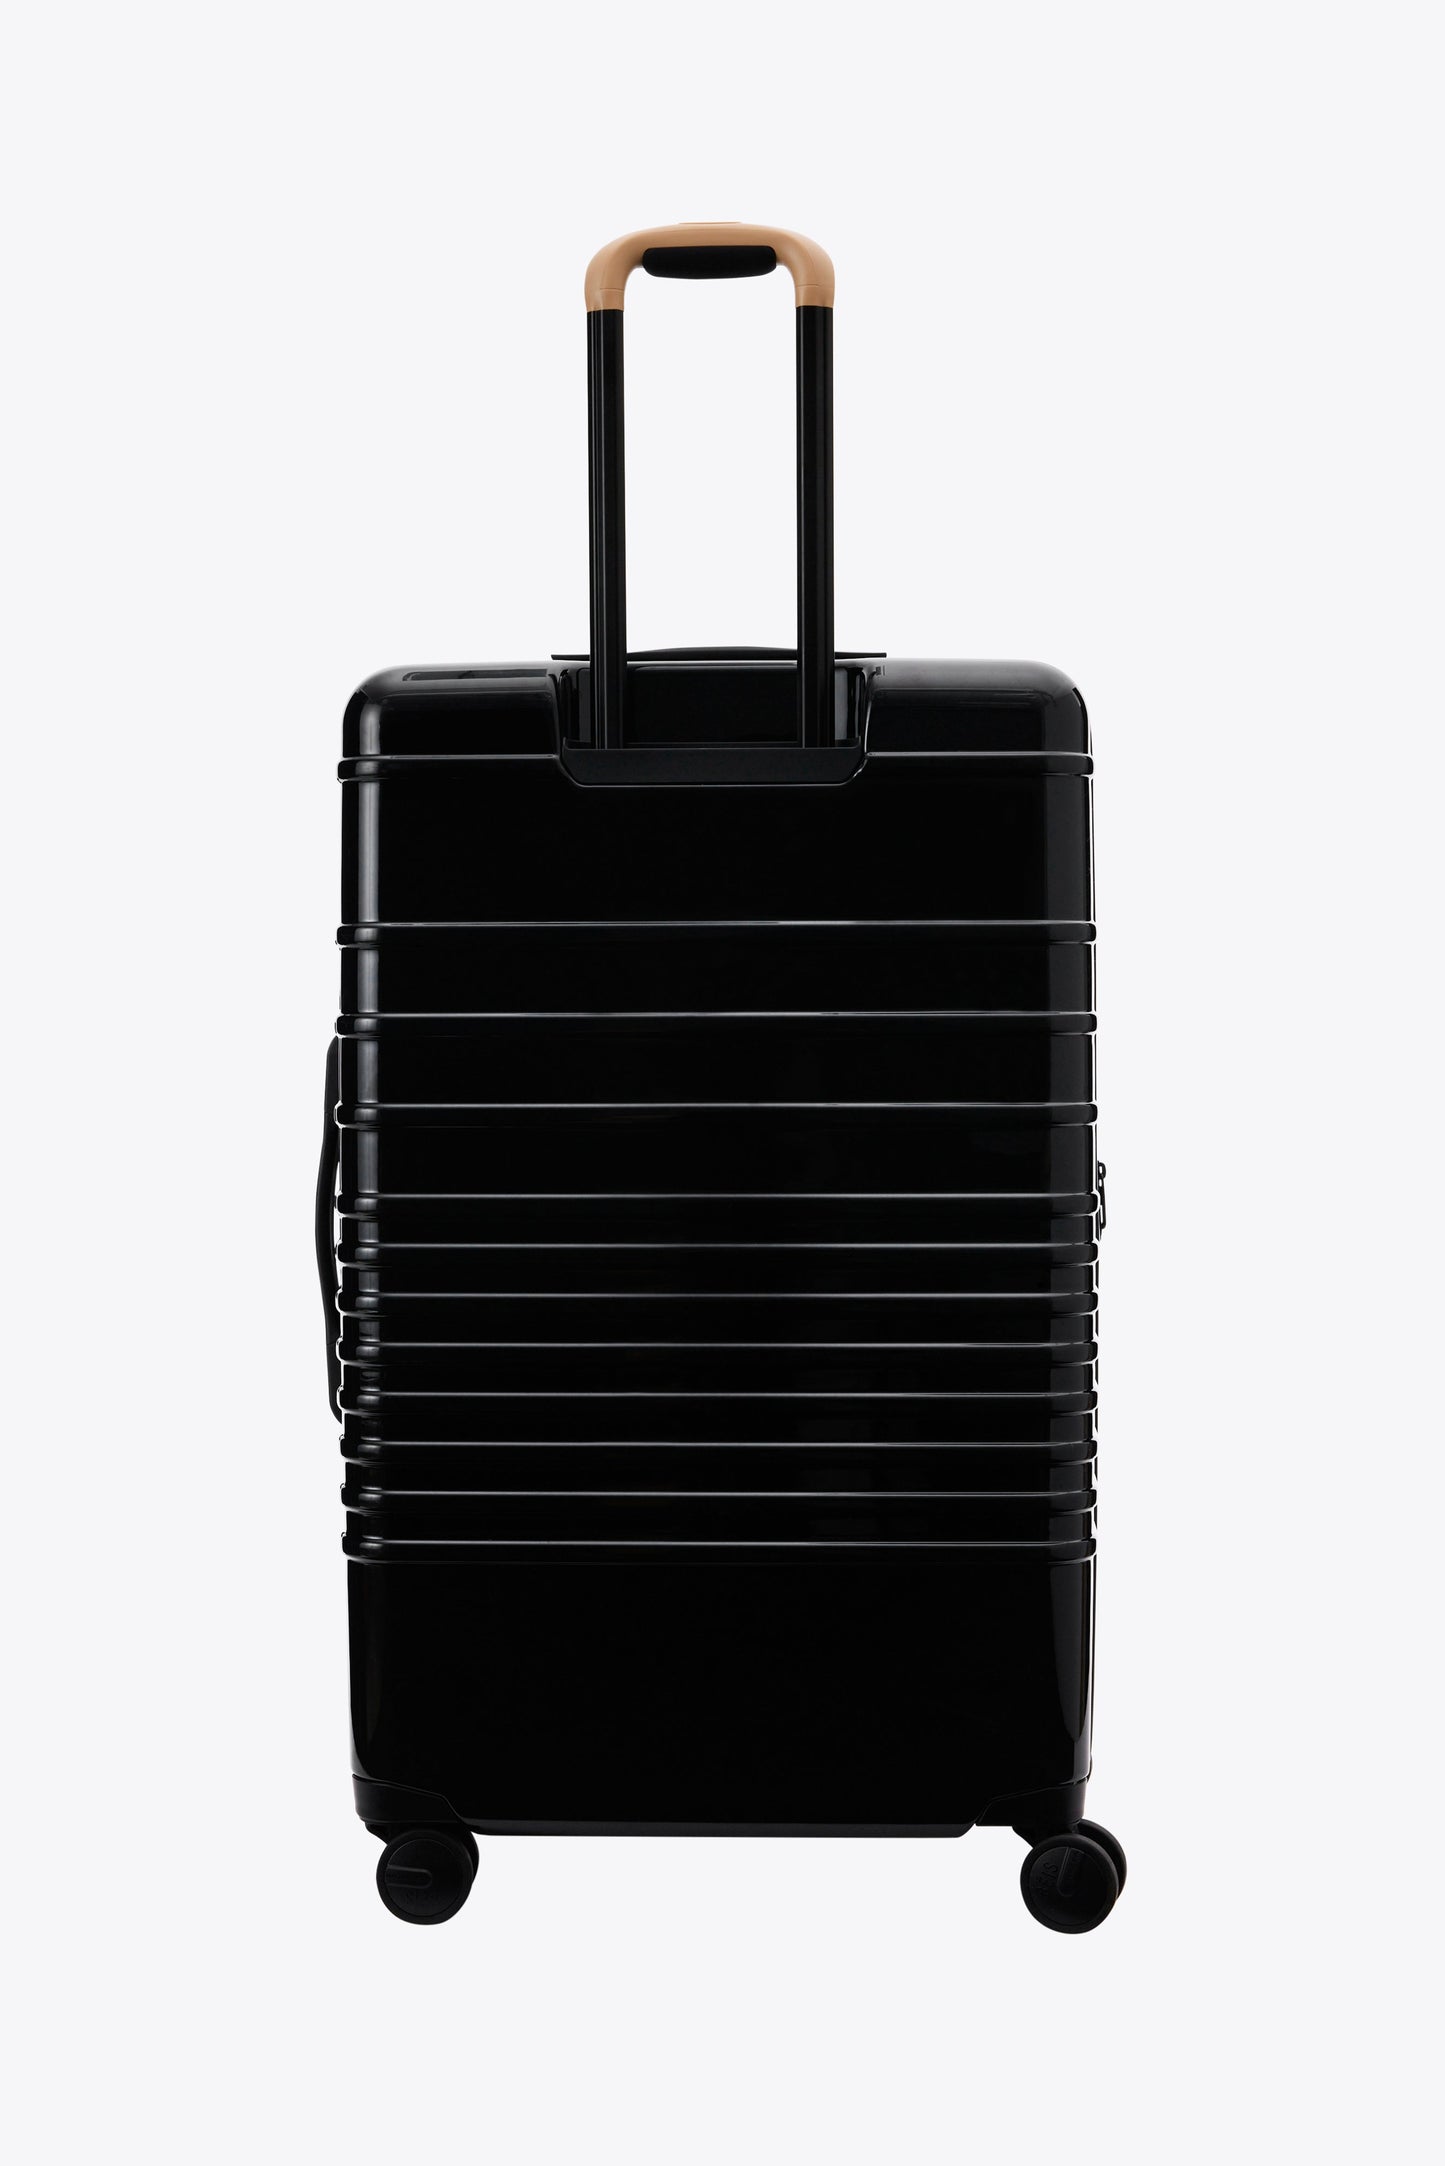 The Large Check-In Roller in Glossy Black